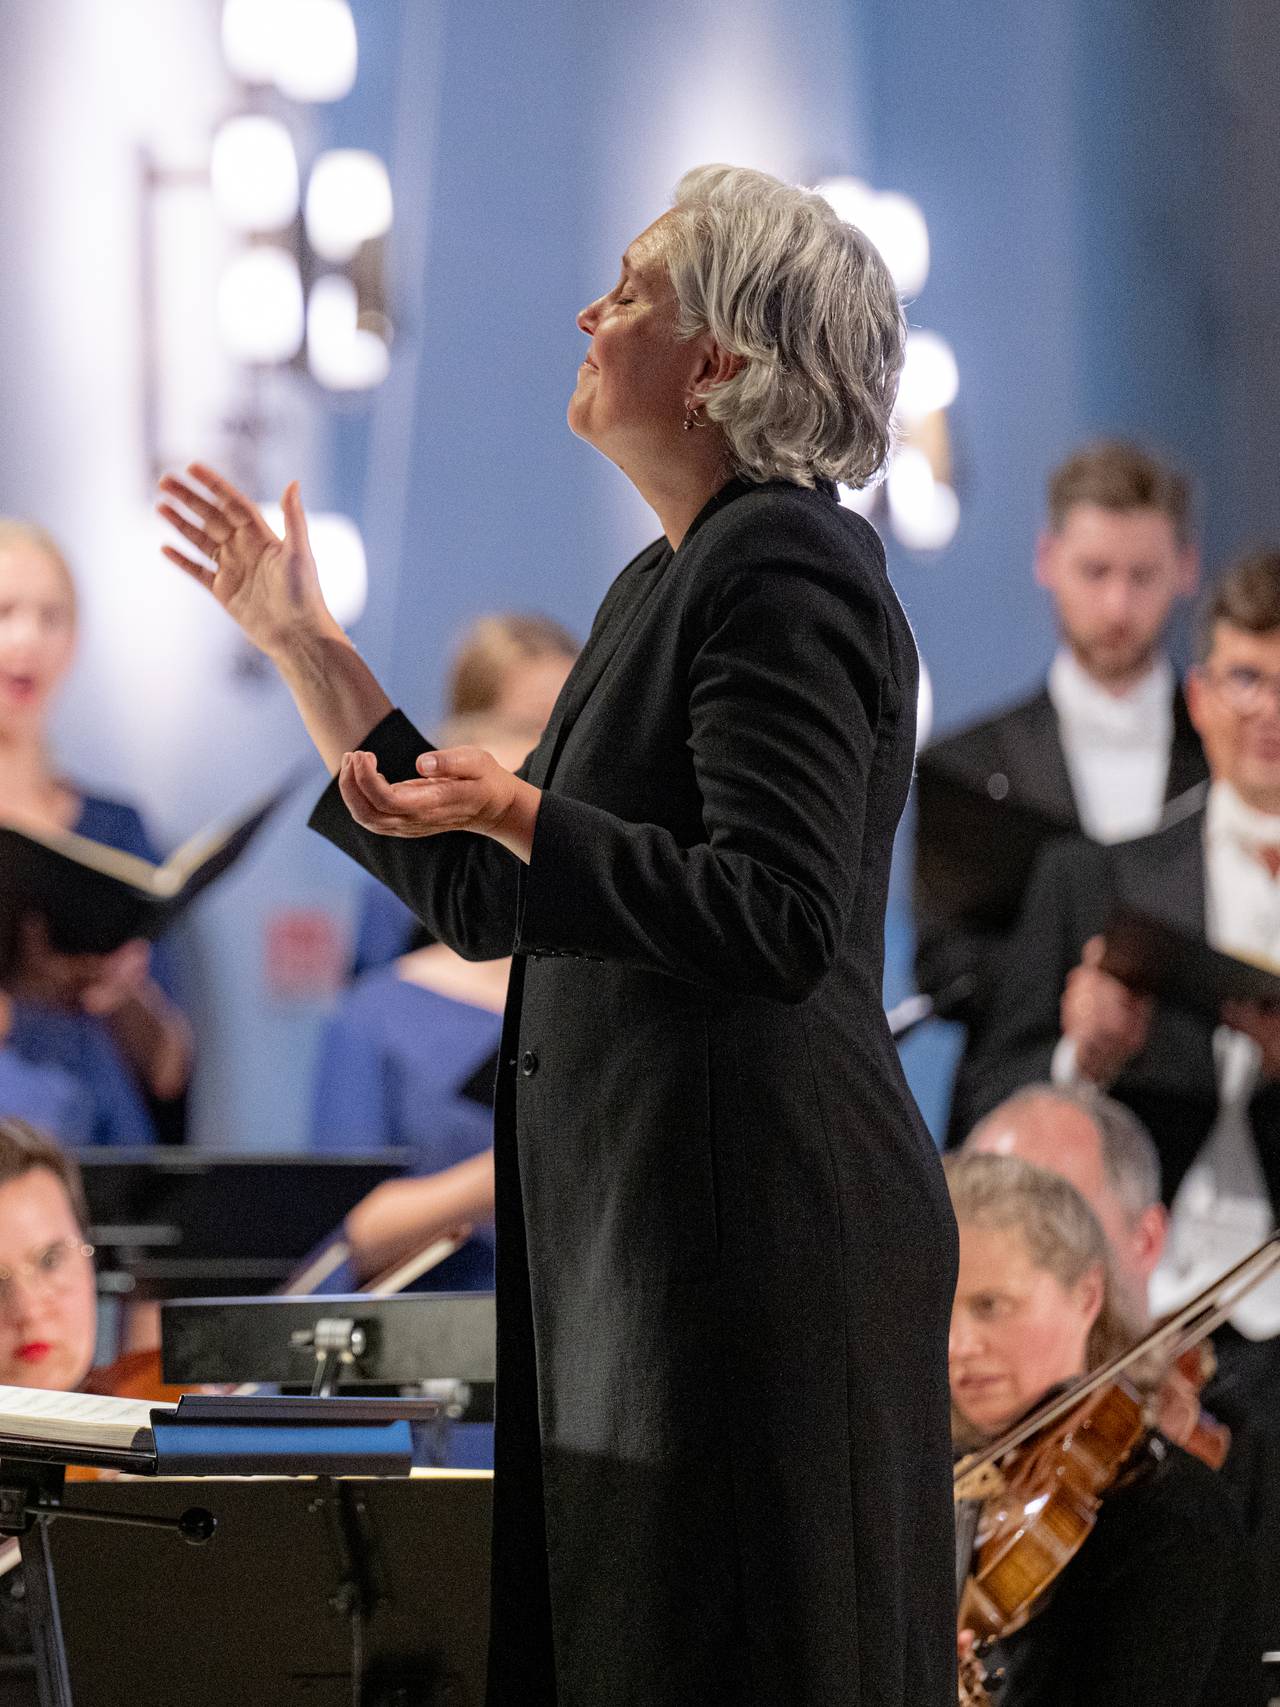 Vivian Sydneys performs Mozart's Requiem during the 2022 Oslo Chamber Music Festival.